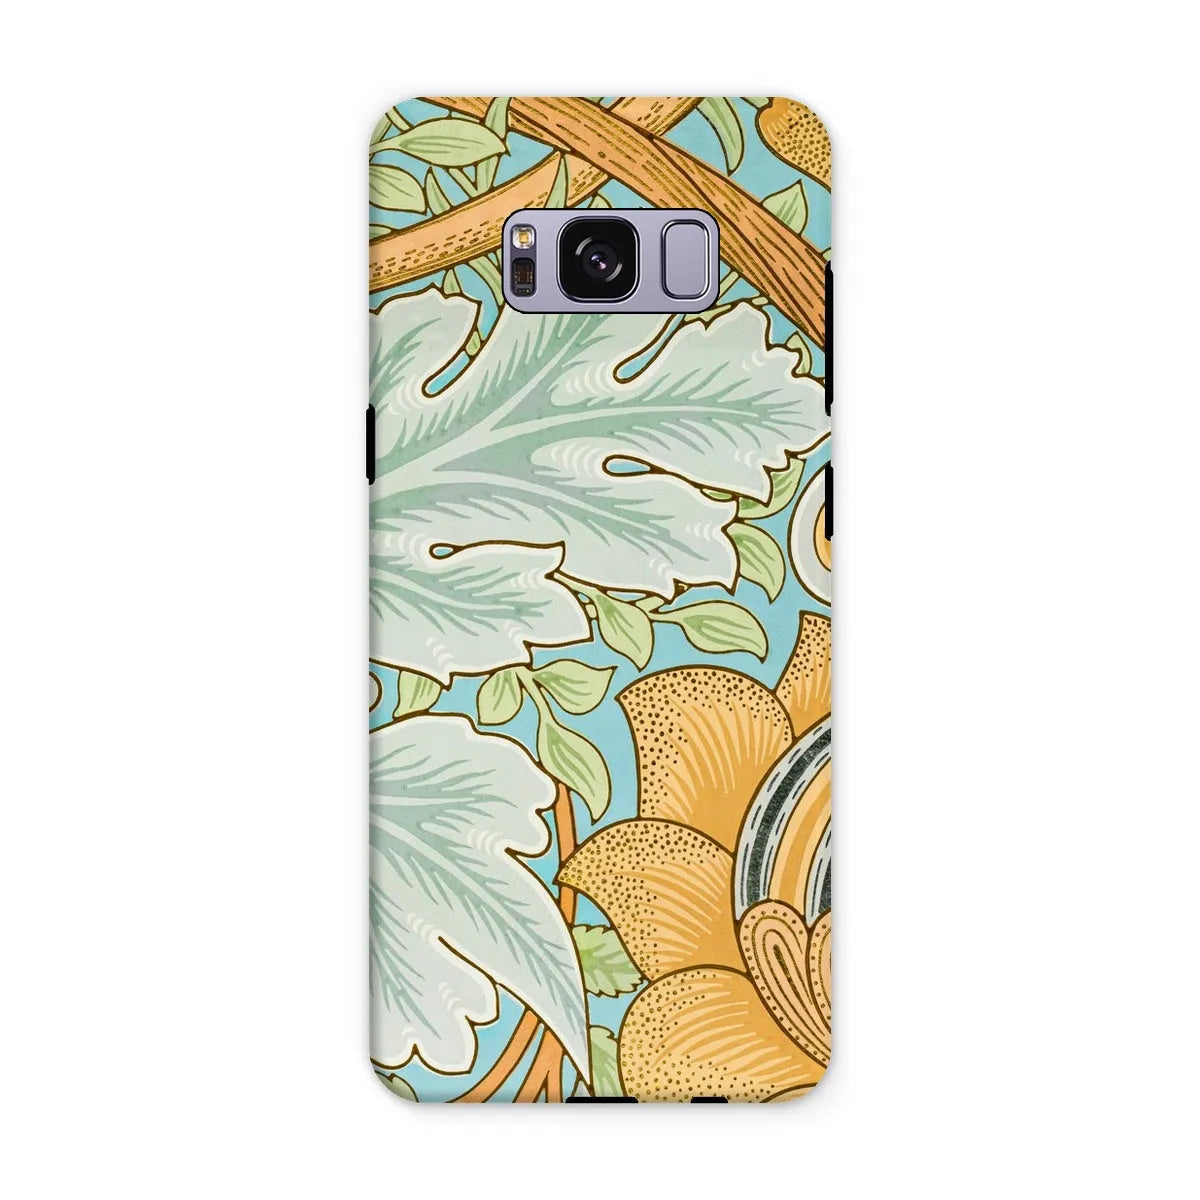 St. James - Arts And Crafts Phone Case - William Morris - Samsung Galaxy S8 Plus / Matte - Mobile Phone Cases